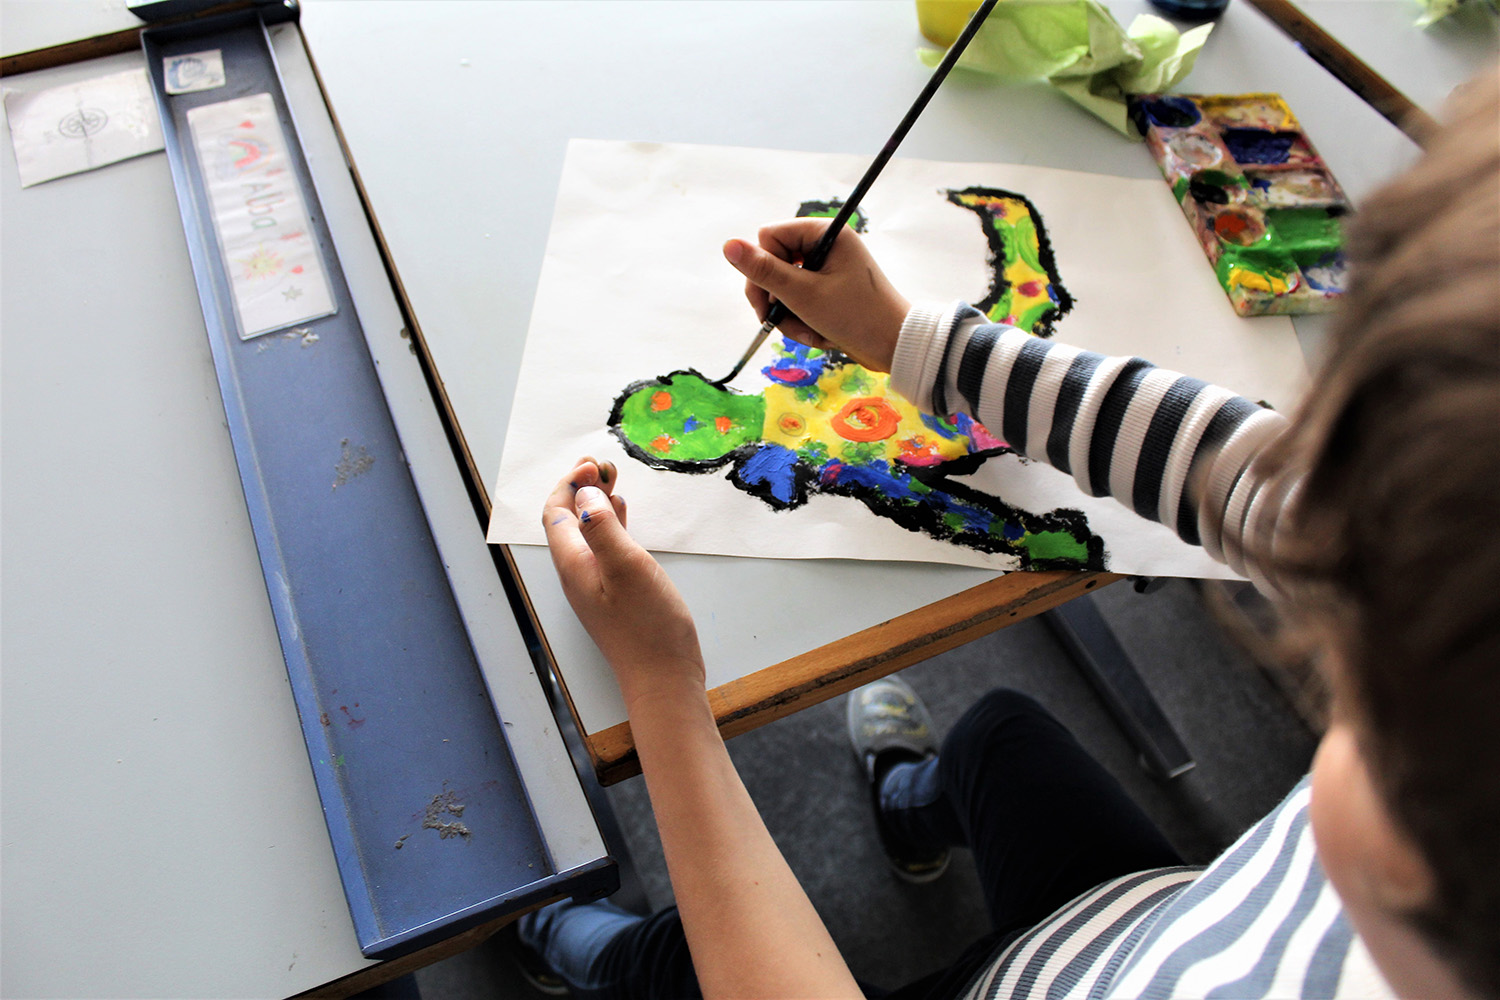 A child's hand paints a colourful little man with a brush on paper on the desk. You can see the back of the child's head, the painting hand and the motif.